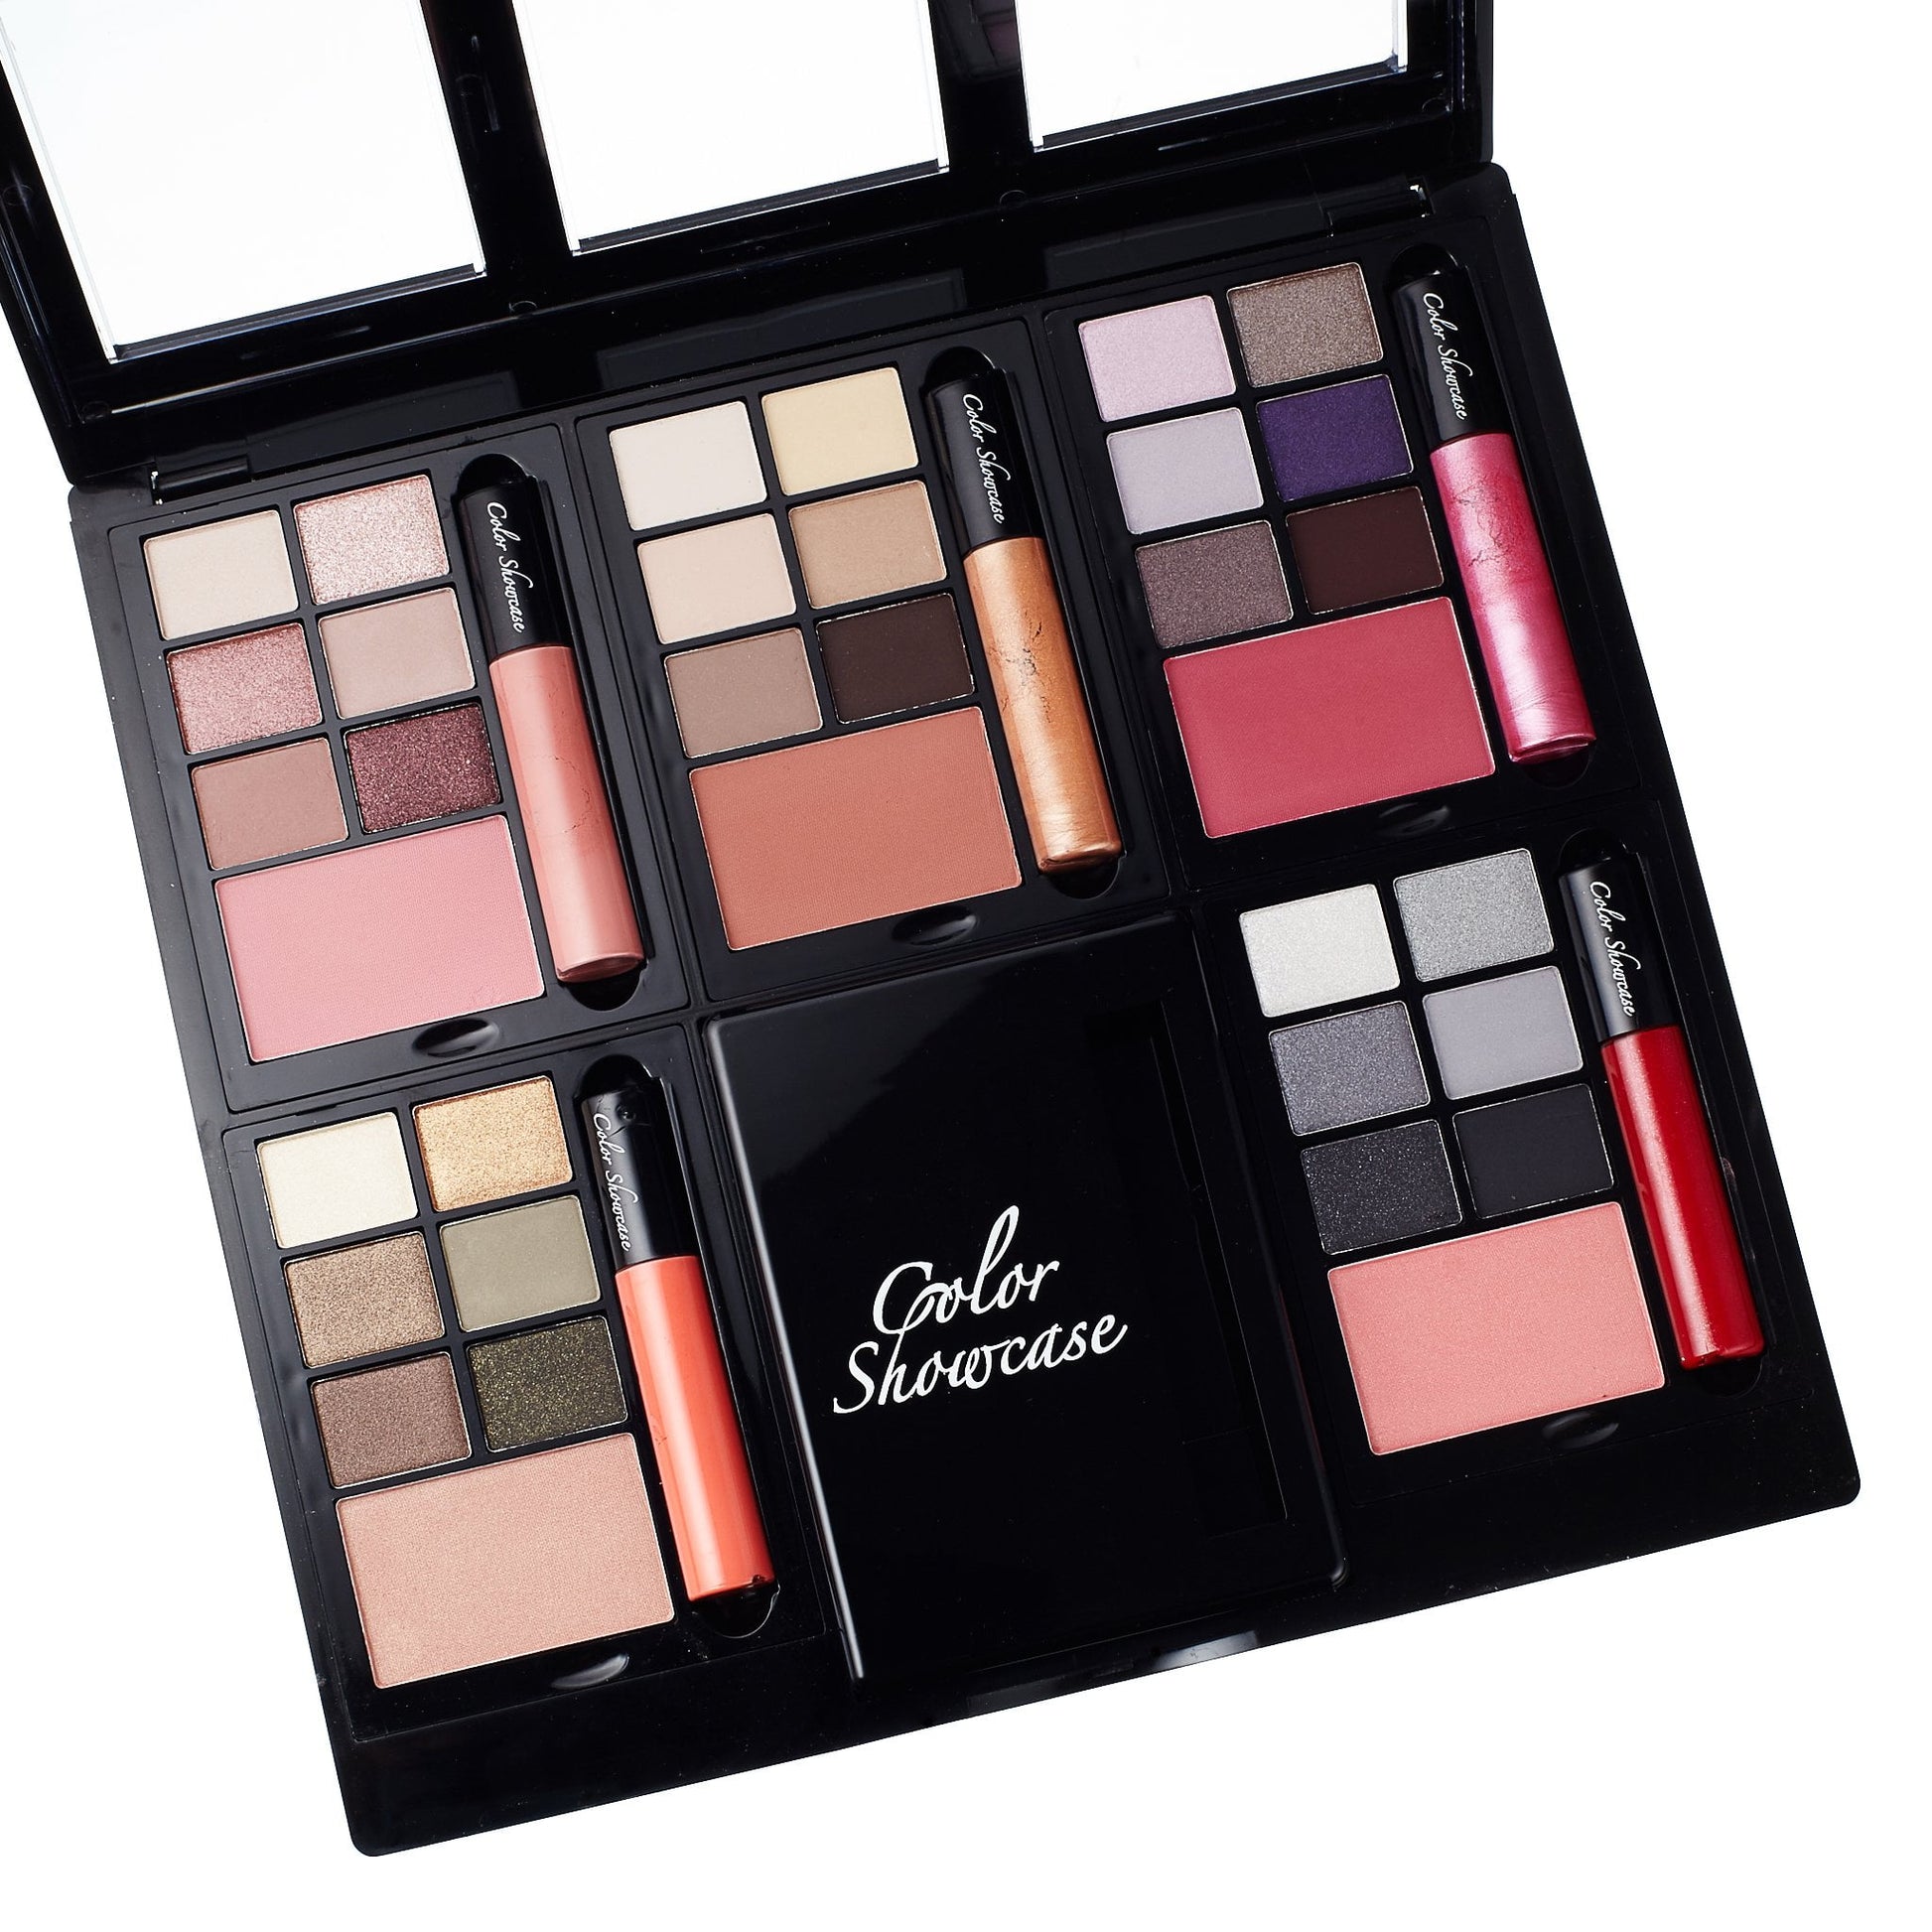 Color Show Case Travel Make Up Compact Set Pallet for Women, Product image 2